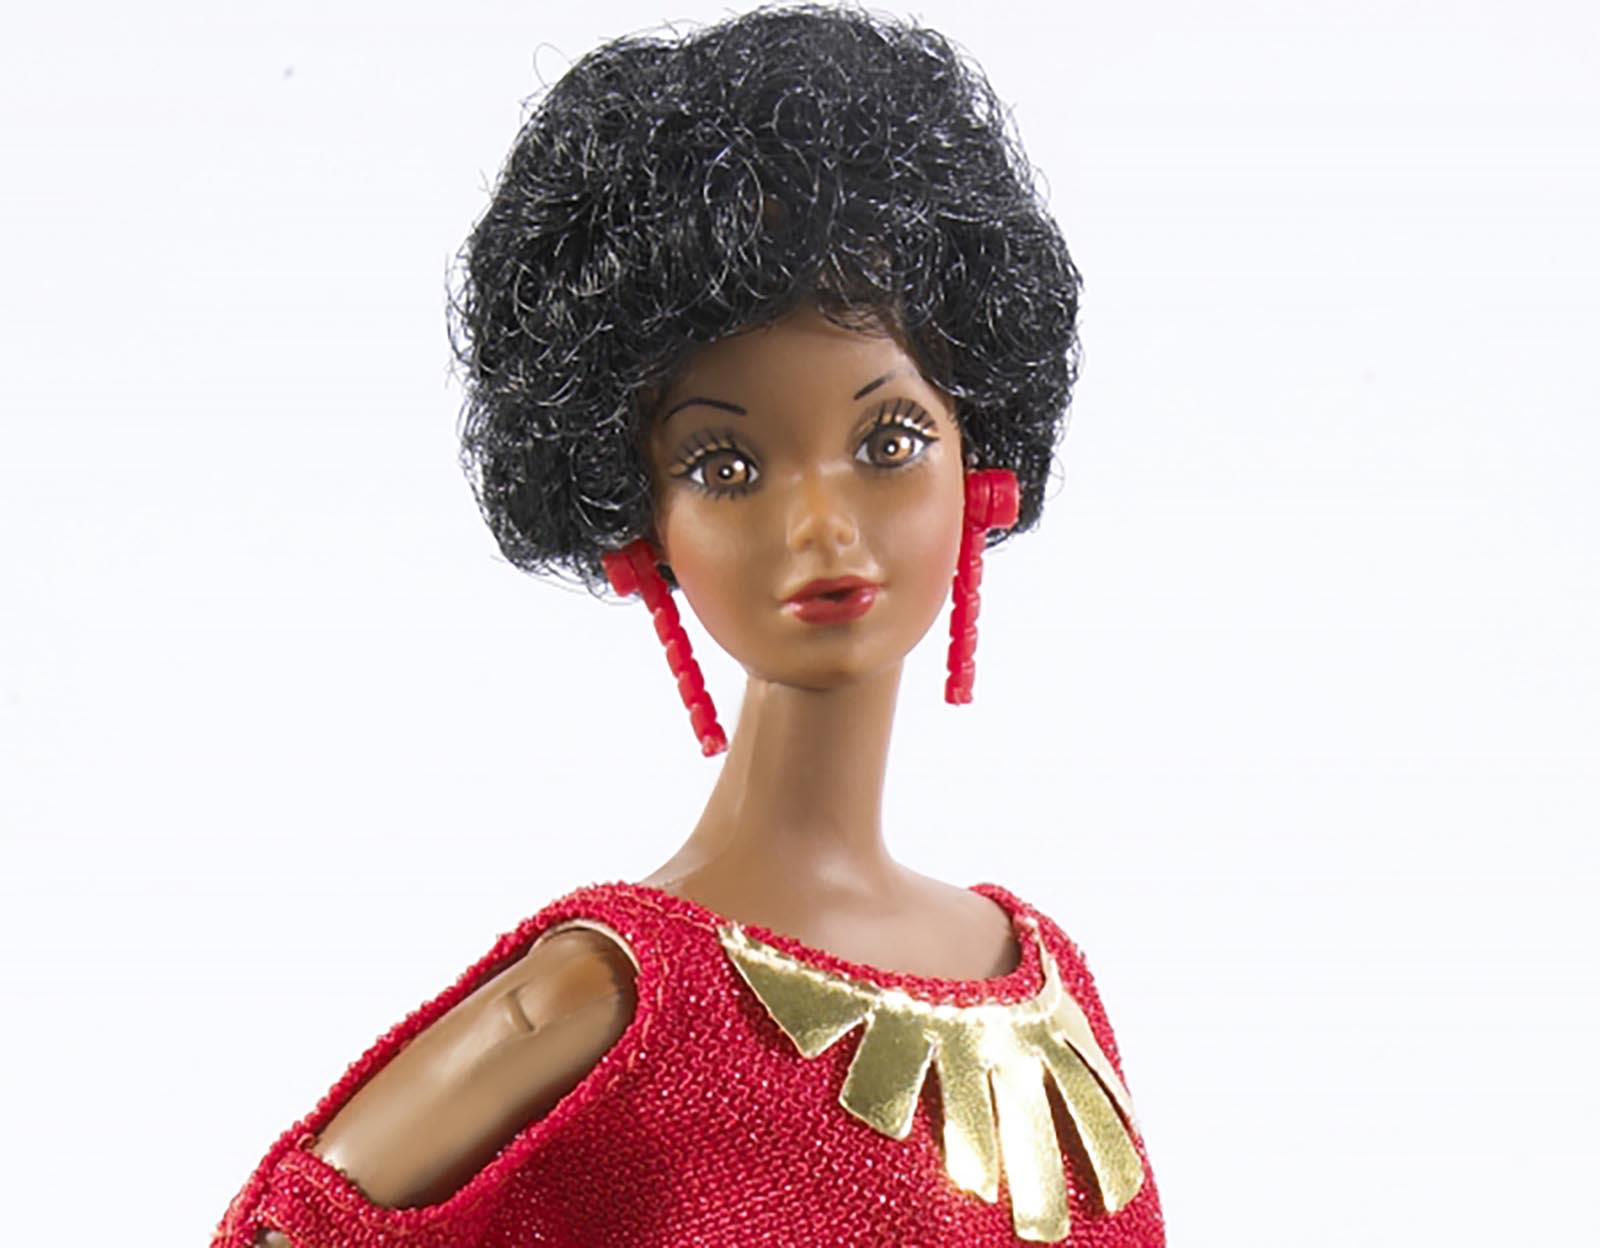 Barbie turns 60: how has the world's most famous doll grown up?